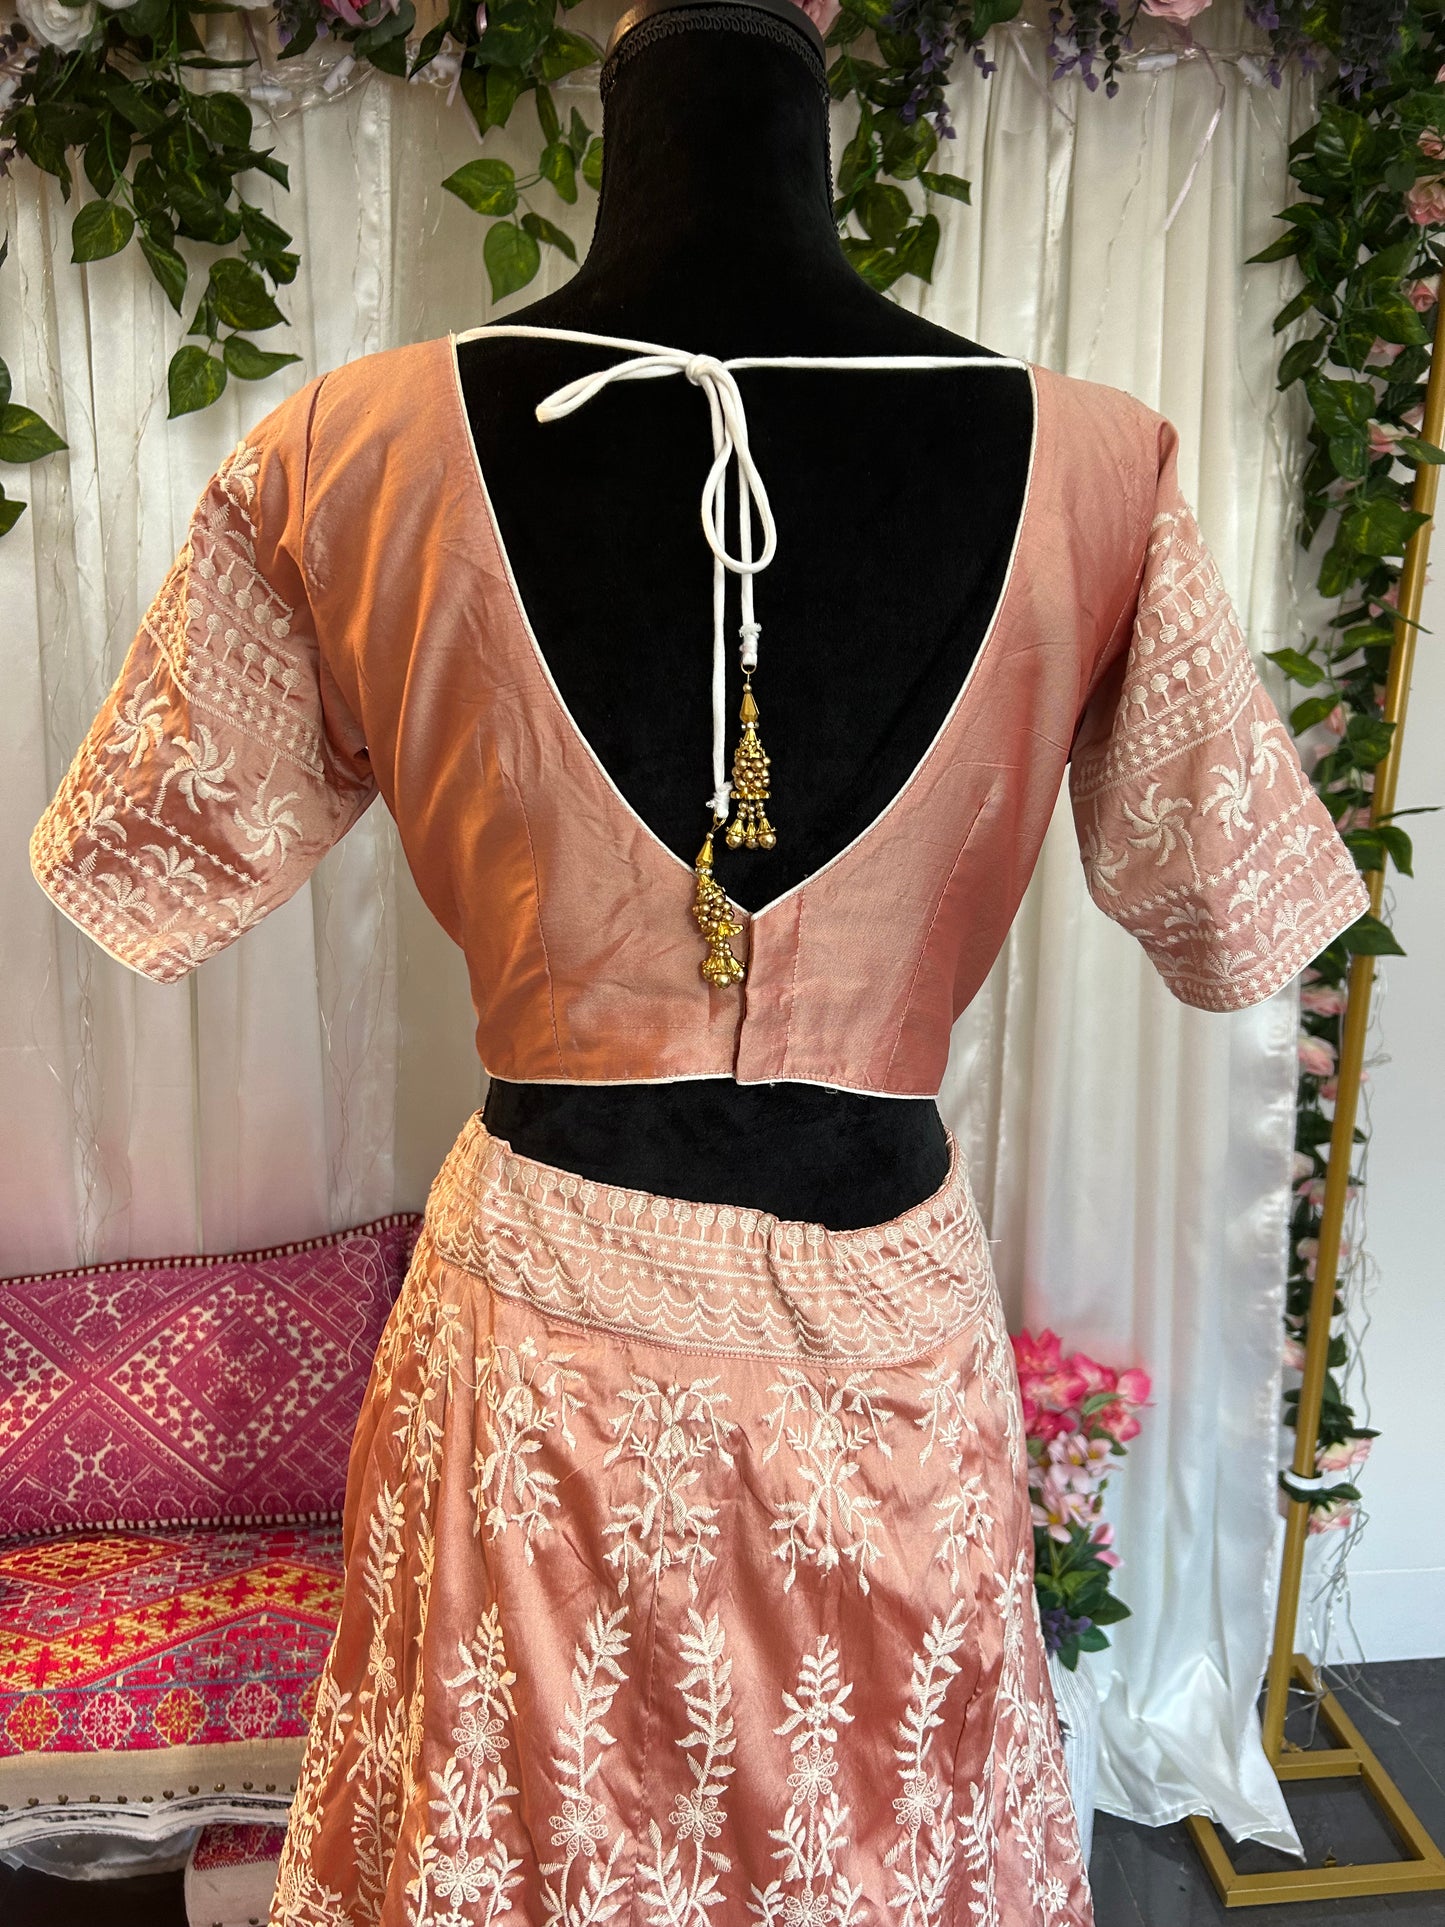 Dusty Pink Lehenga with Blouse and Dupatta